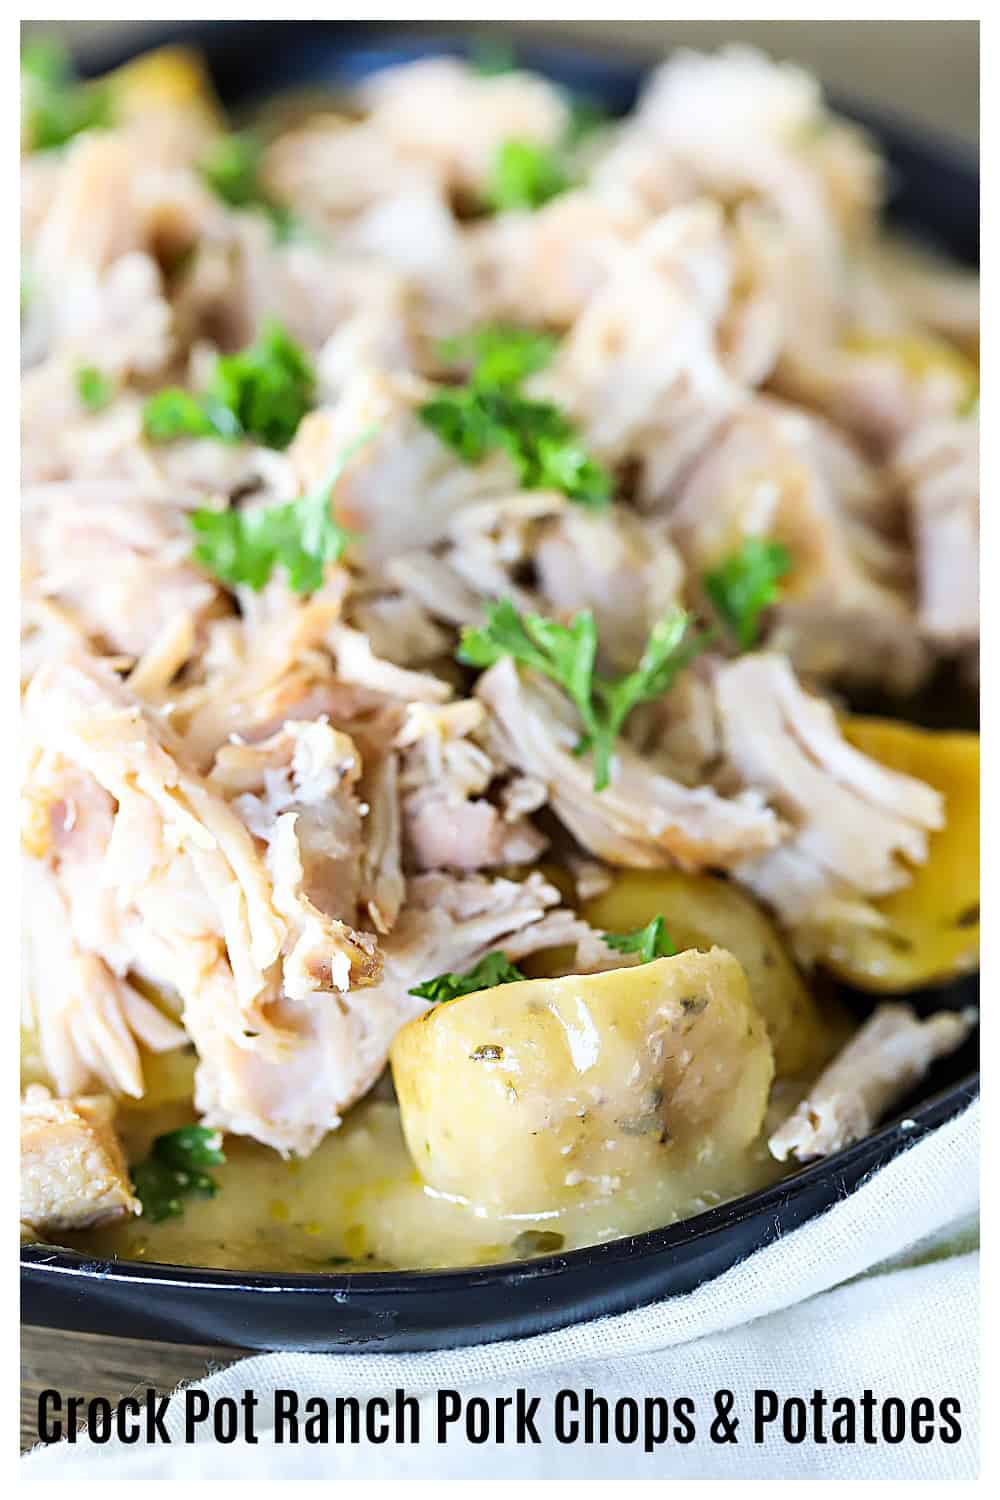 These Creamy Ranch Crock Pot Pork Chops and Potatoes are fork-tender and melt in your mouth! The sauce has the perfect seasonings that pairs so well with the pork and potatoes. A must make slow cooker dish! via @jennikolaus